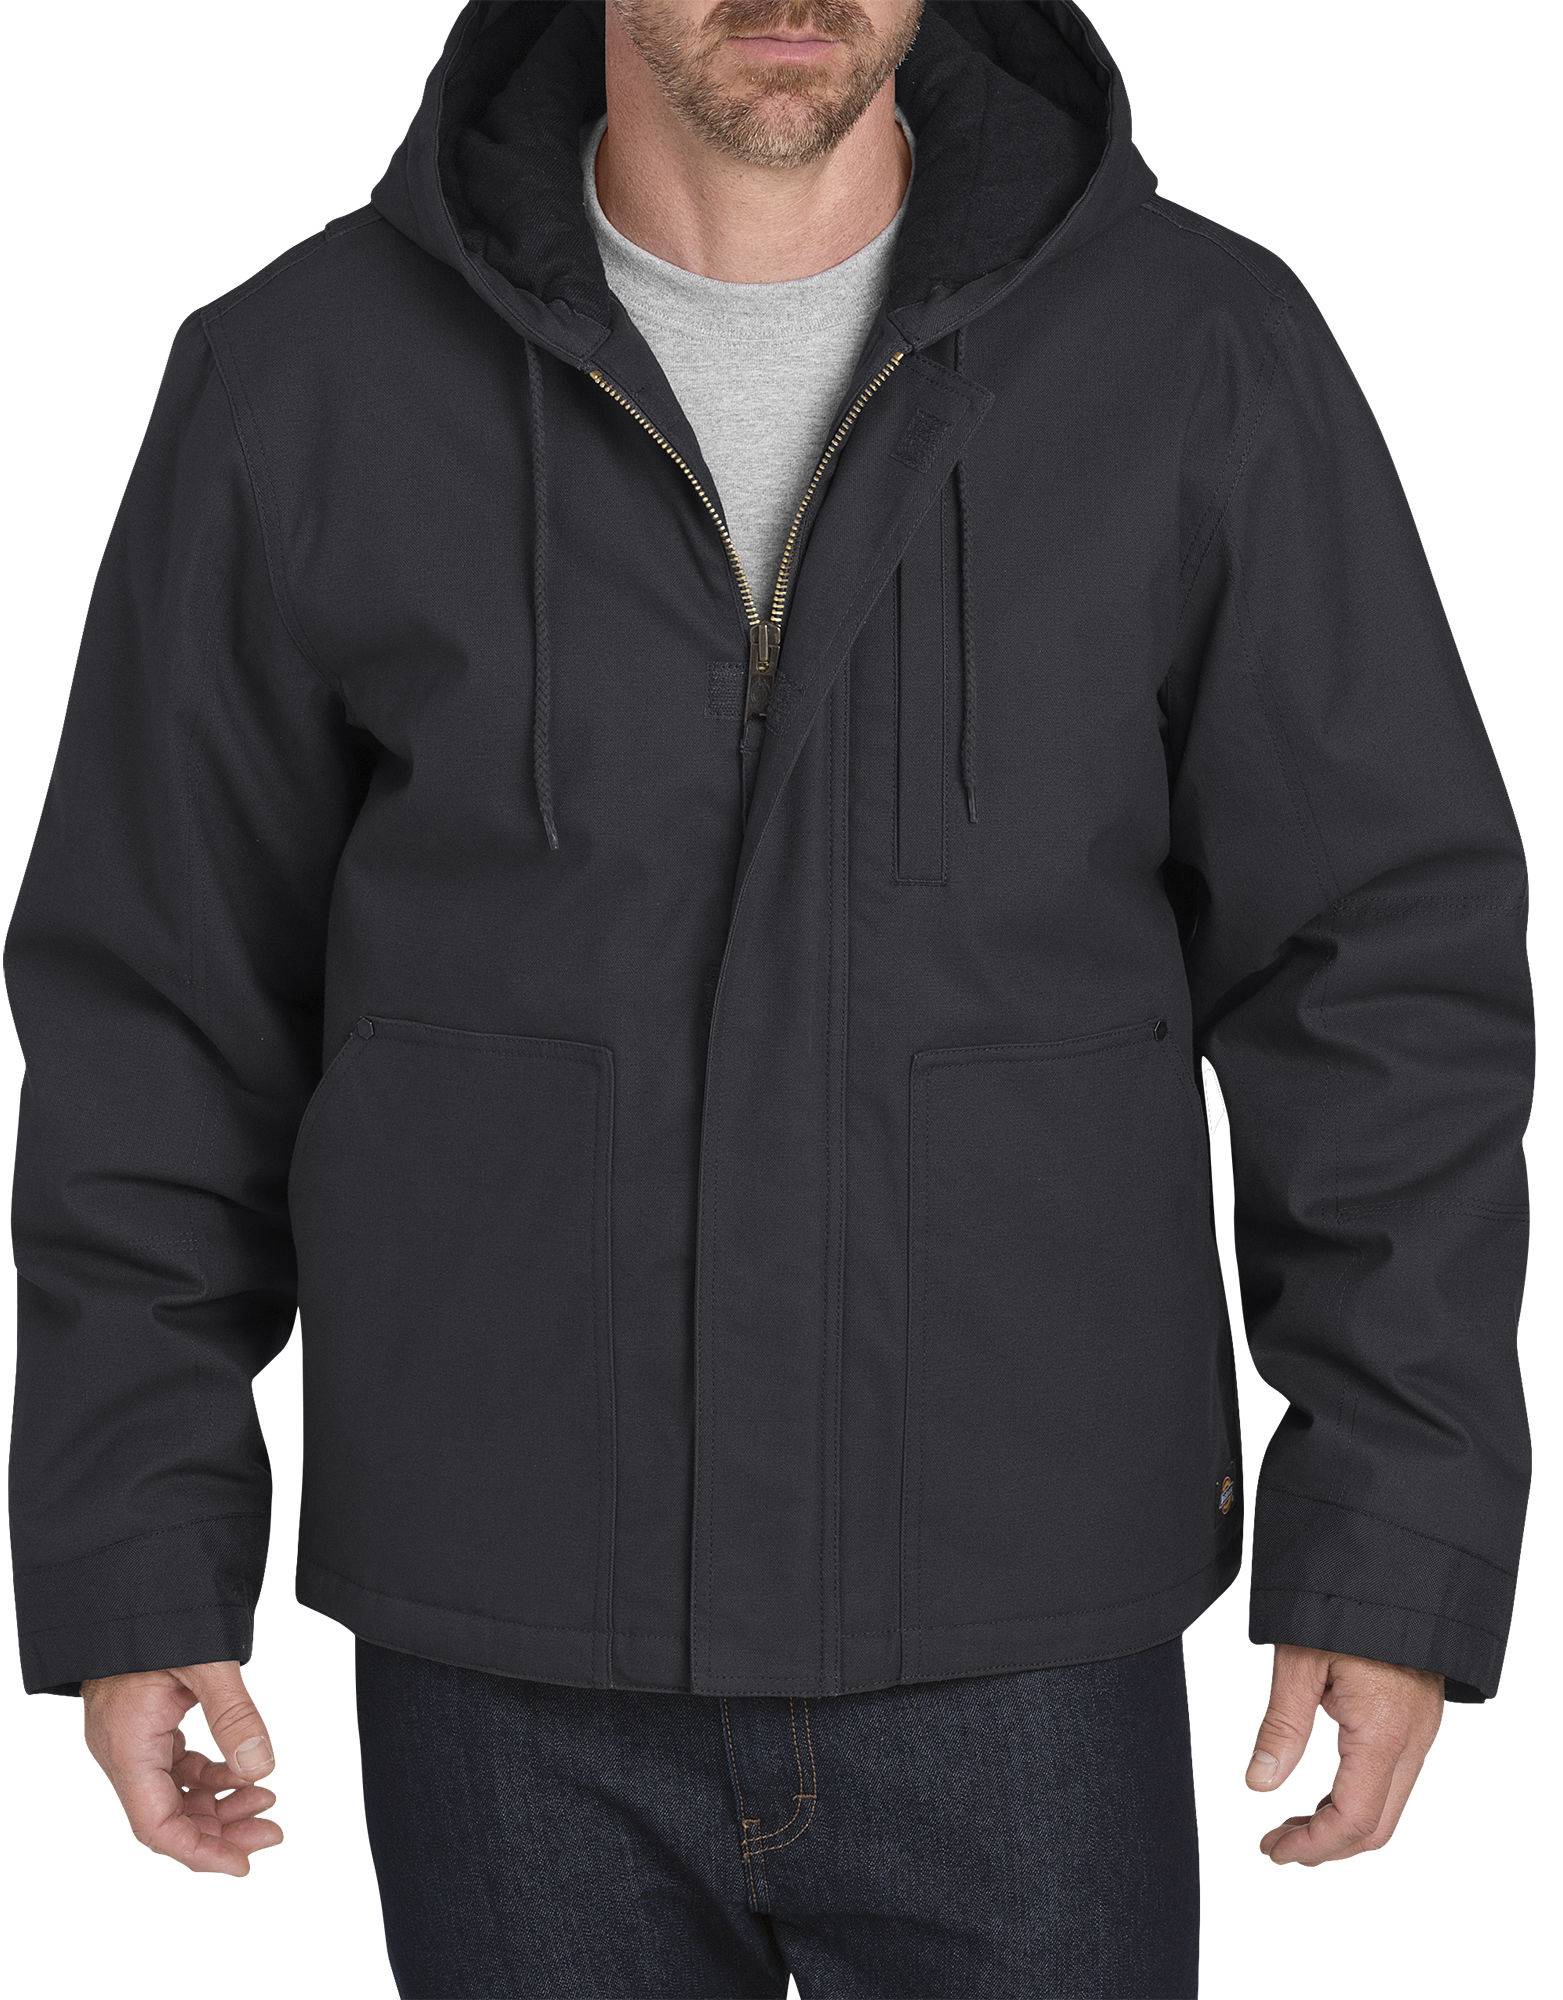 FLEX Sanded Duck Mobility Jacket - Corporate Cleaners & Laundry